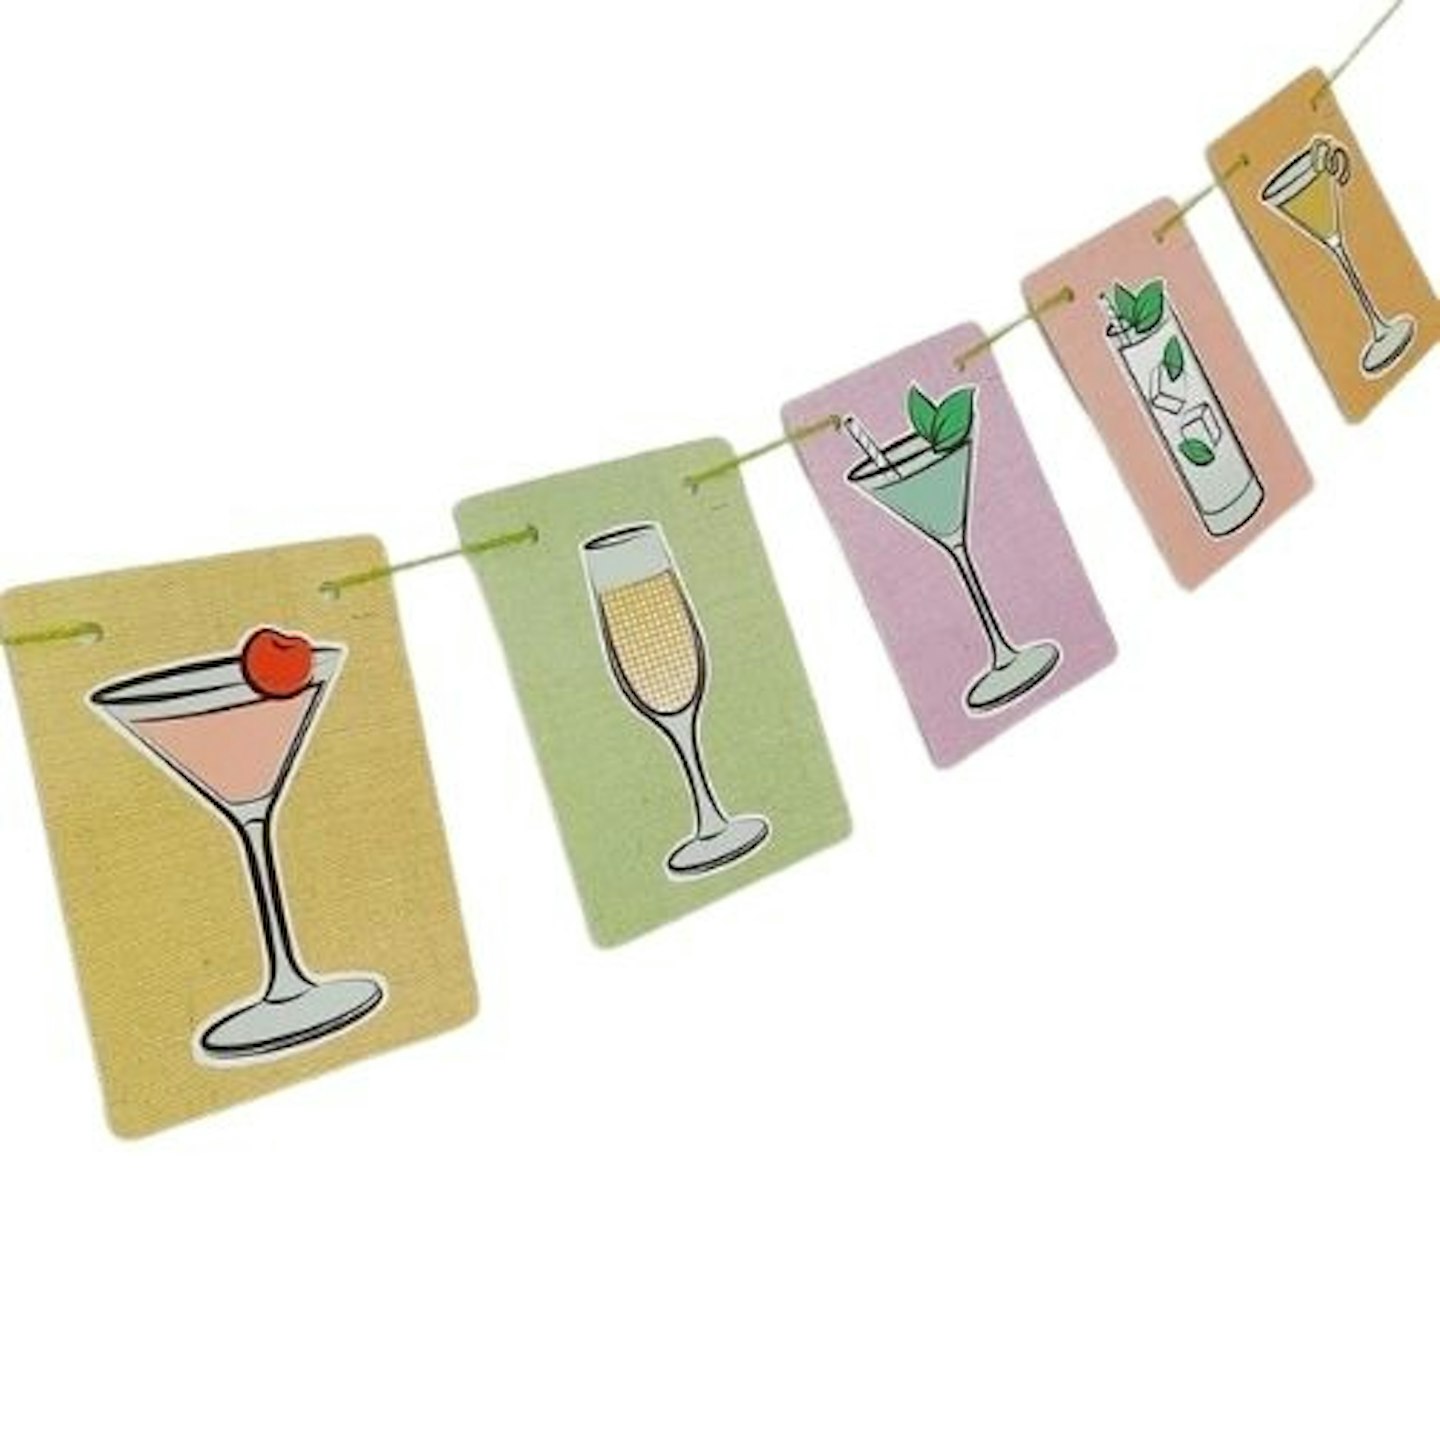 Various designs of cocktails on bunting.